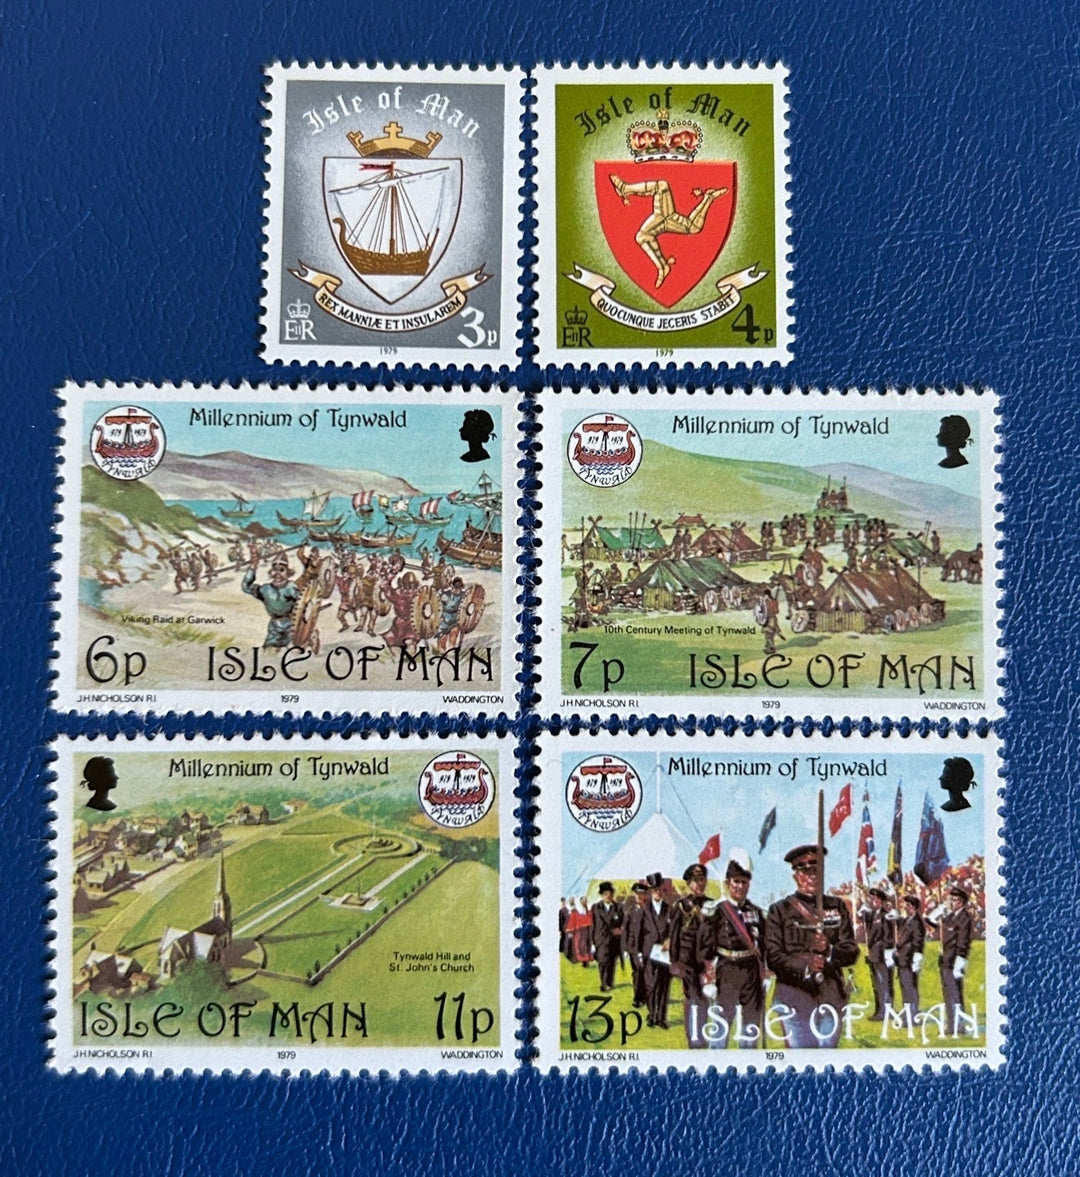 Isle of Man - Original Vintage Postage Stamps - 1979 - Millenium of Tynwald - for the collector, artist or crafter